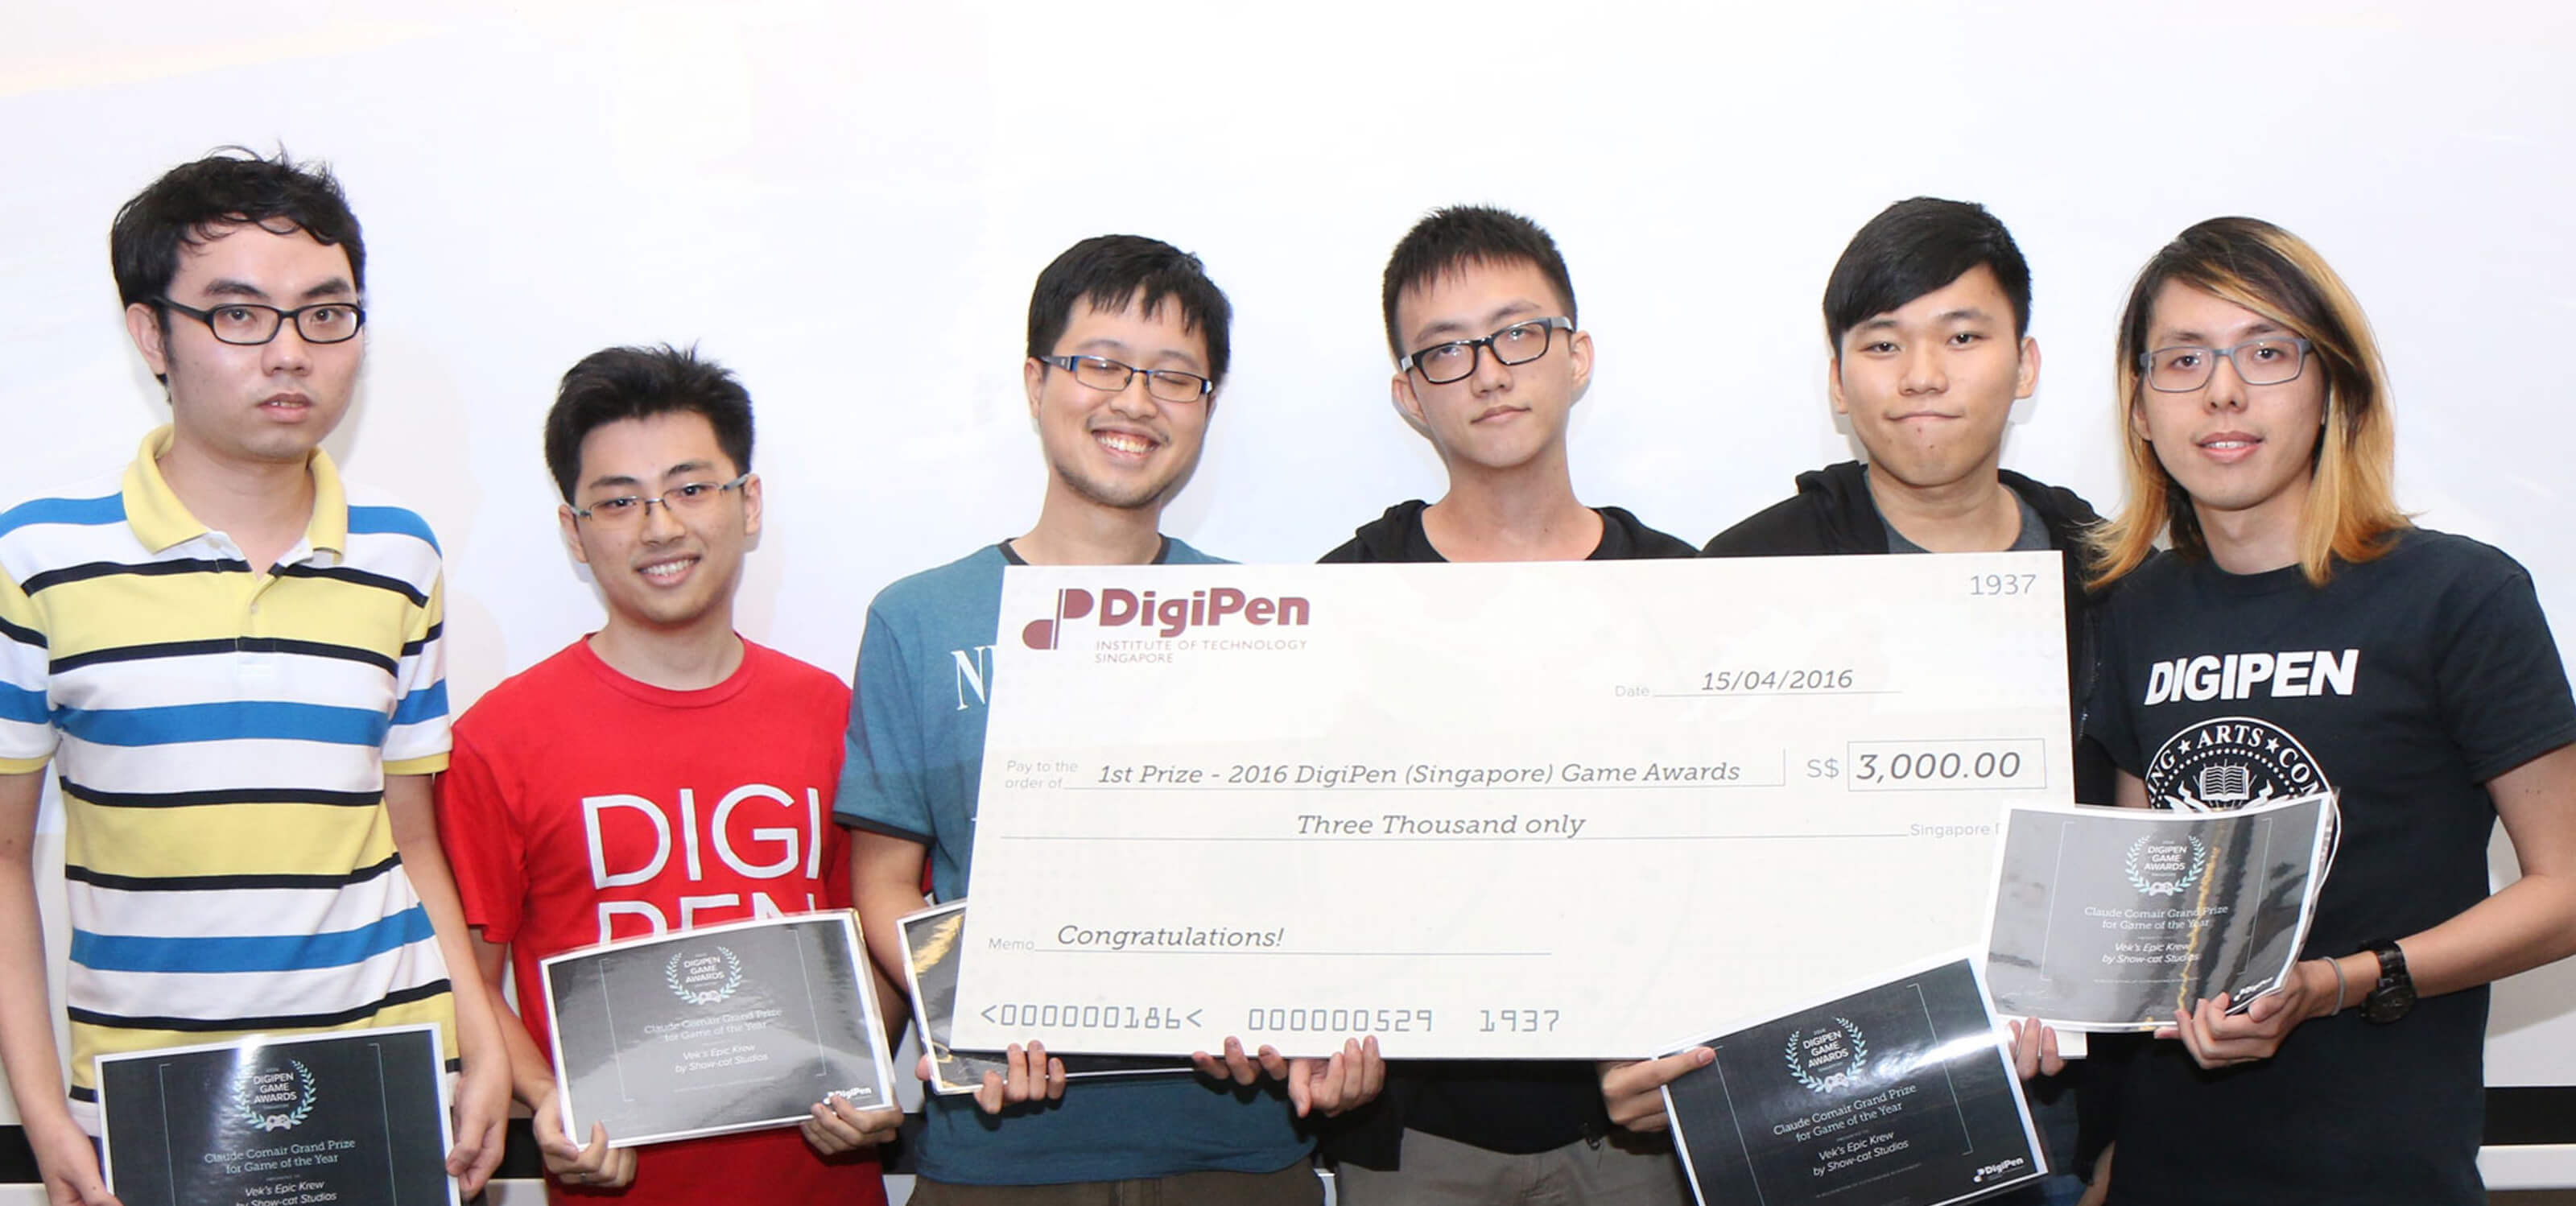 Students in the DigiPen (Singapore) Game Awards pose for a picture with certificates and a giant novelty check for $3000